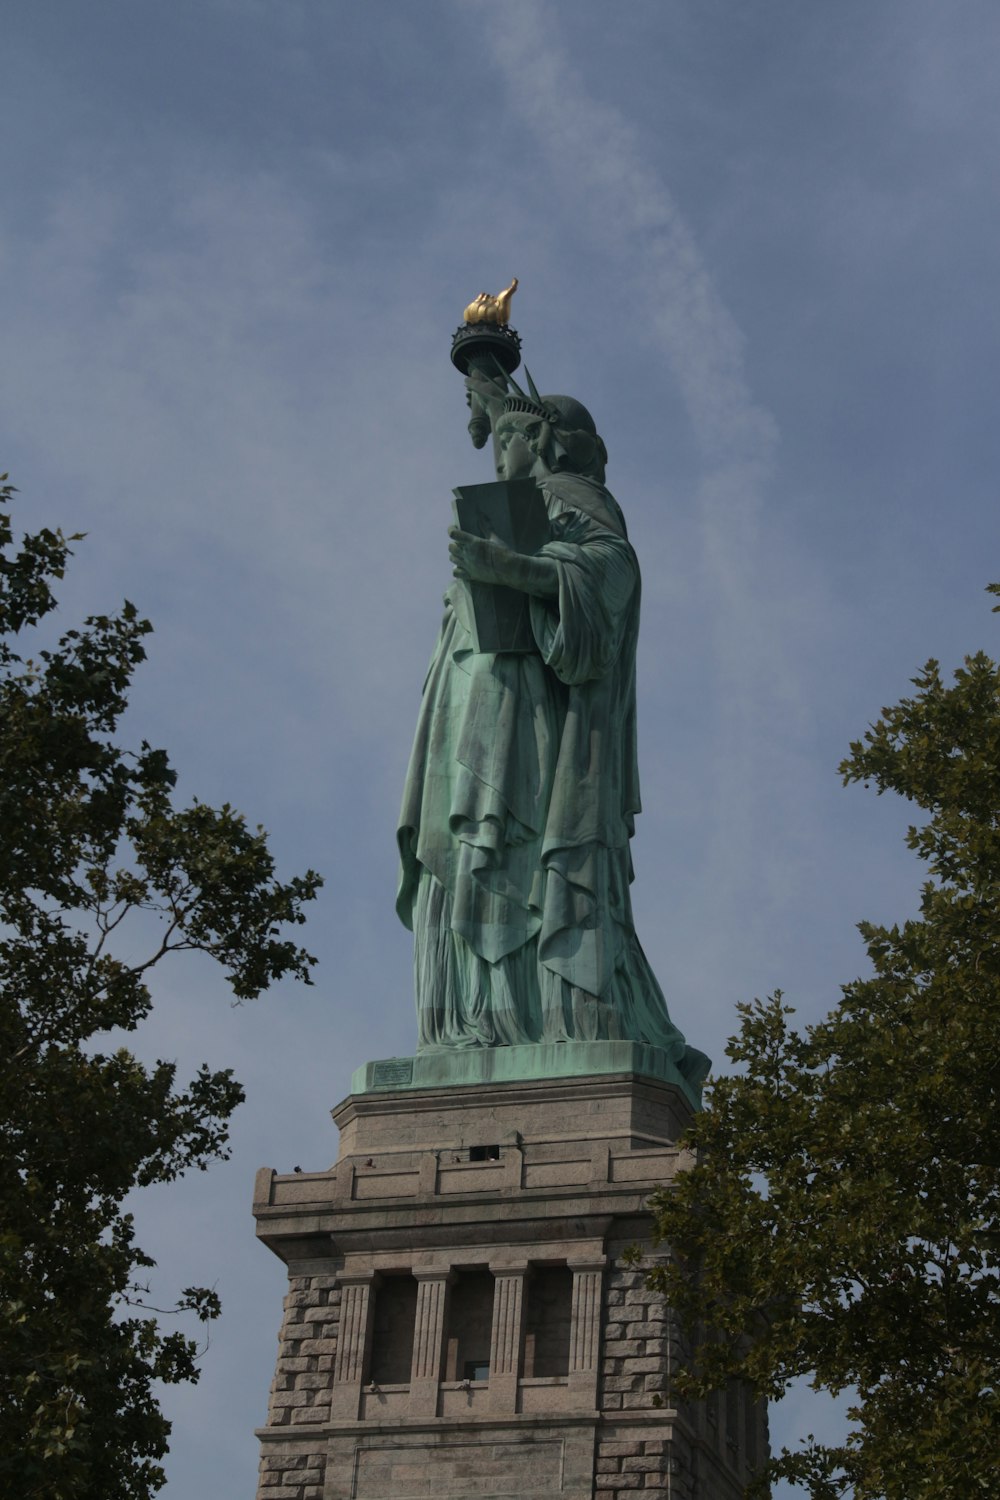 a statue of a person holding a torch